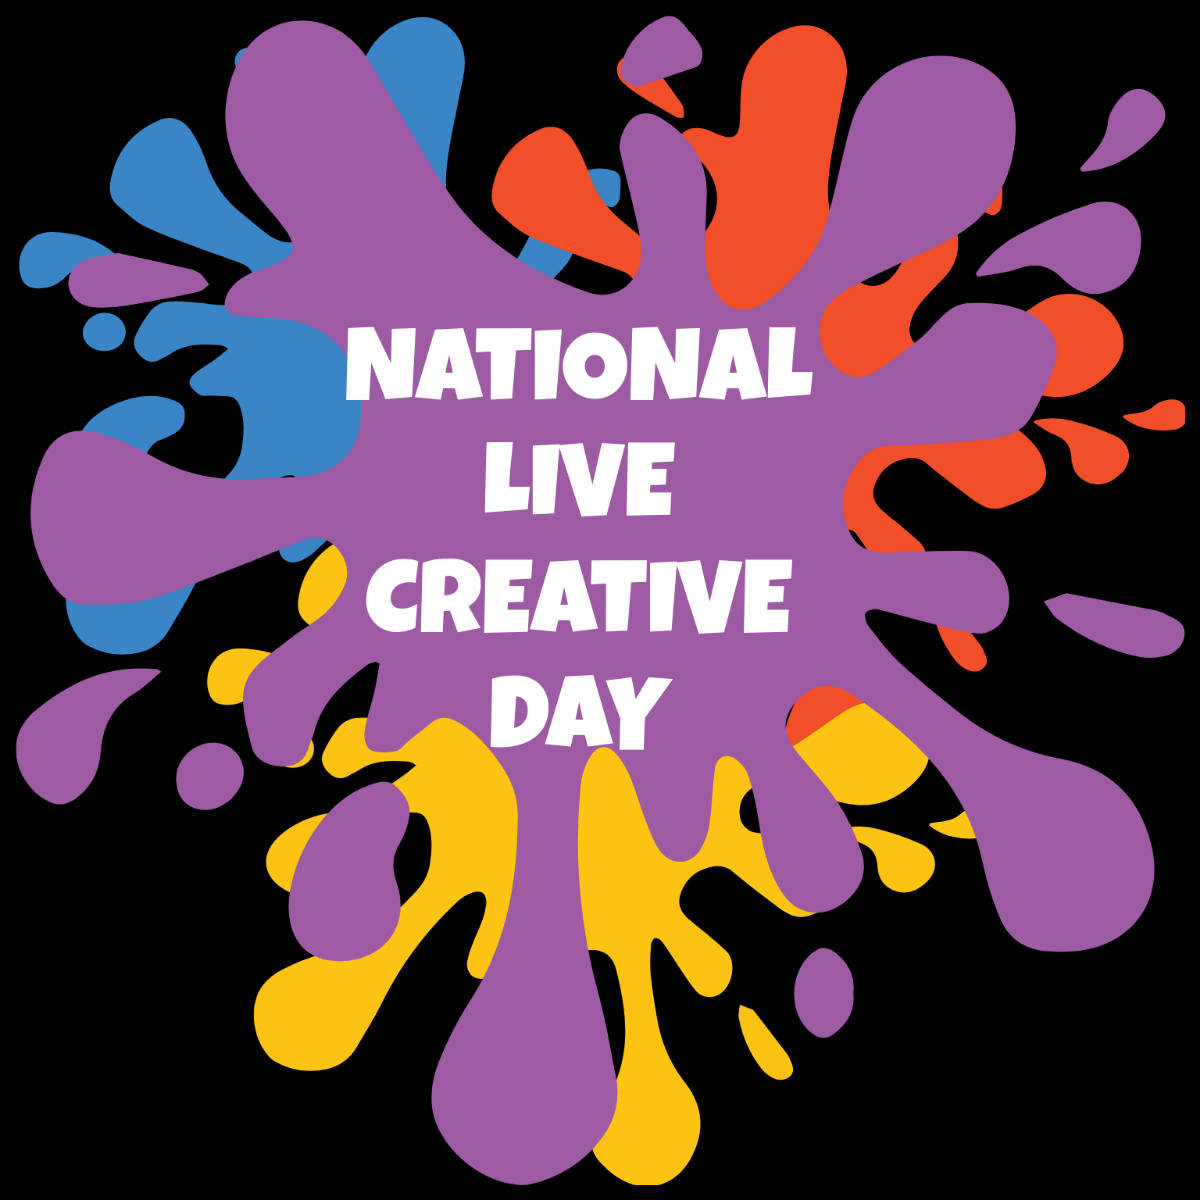 National Live Creative Day Celebration Vector Template